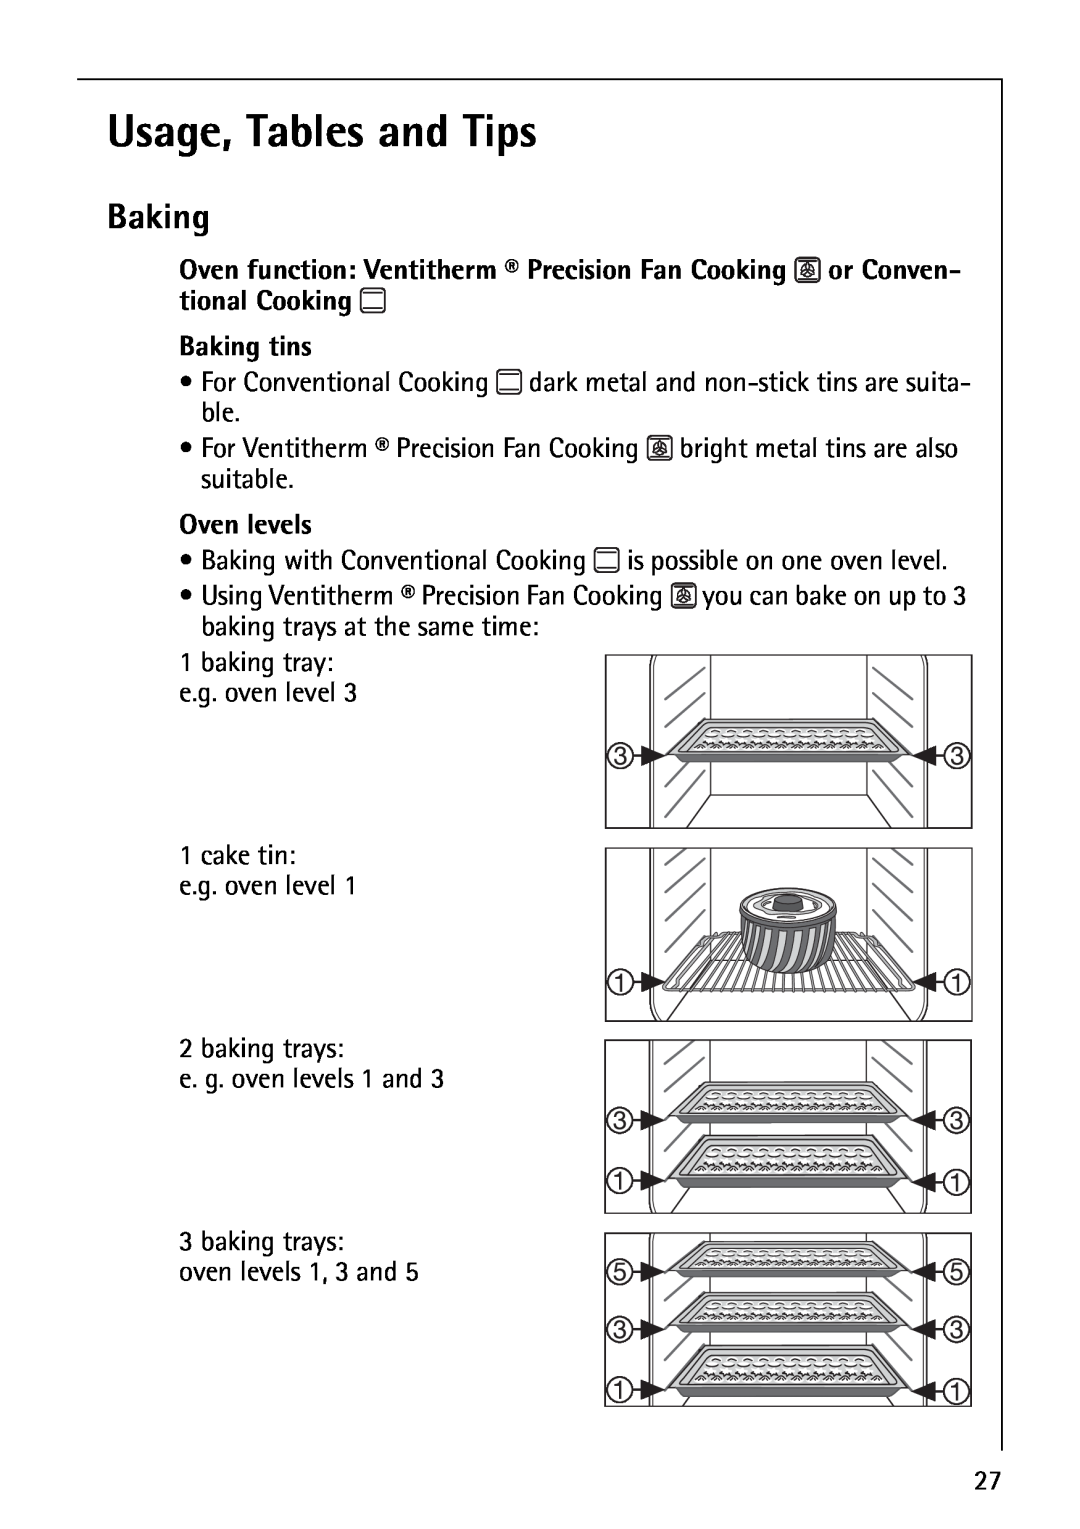 Electrolux B5741-4 manual Usage, Tables and Tips, Baking tins, Oven levels 